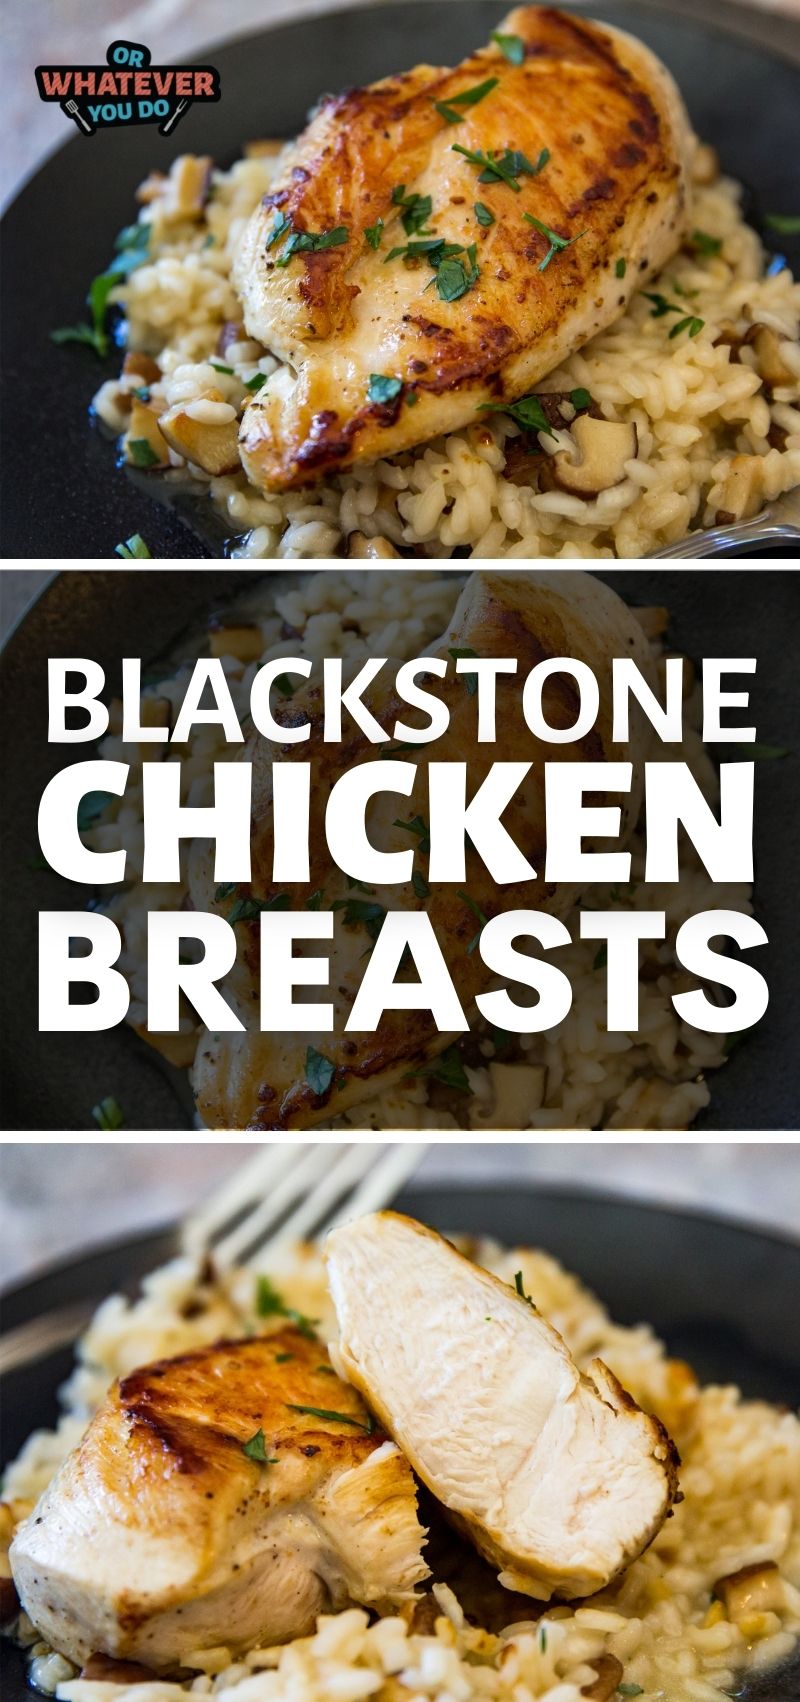 Blackstone Seared Chicken Breasts | Or Whatever You Do